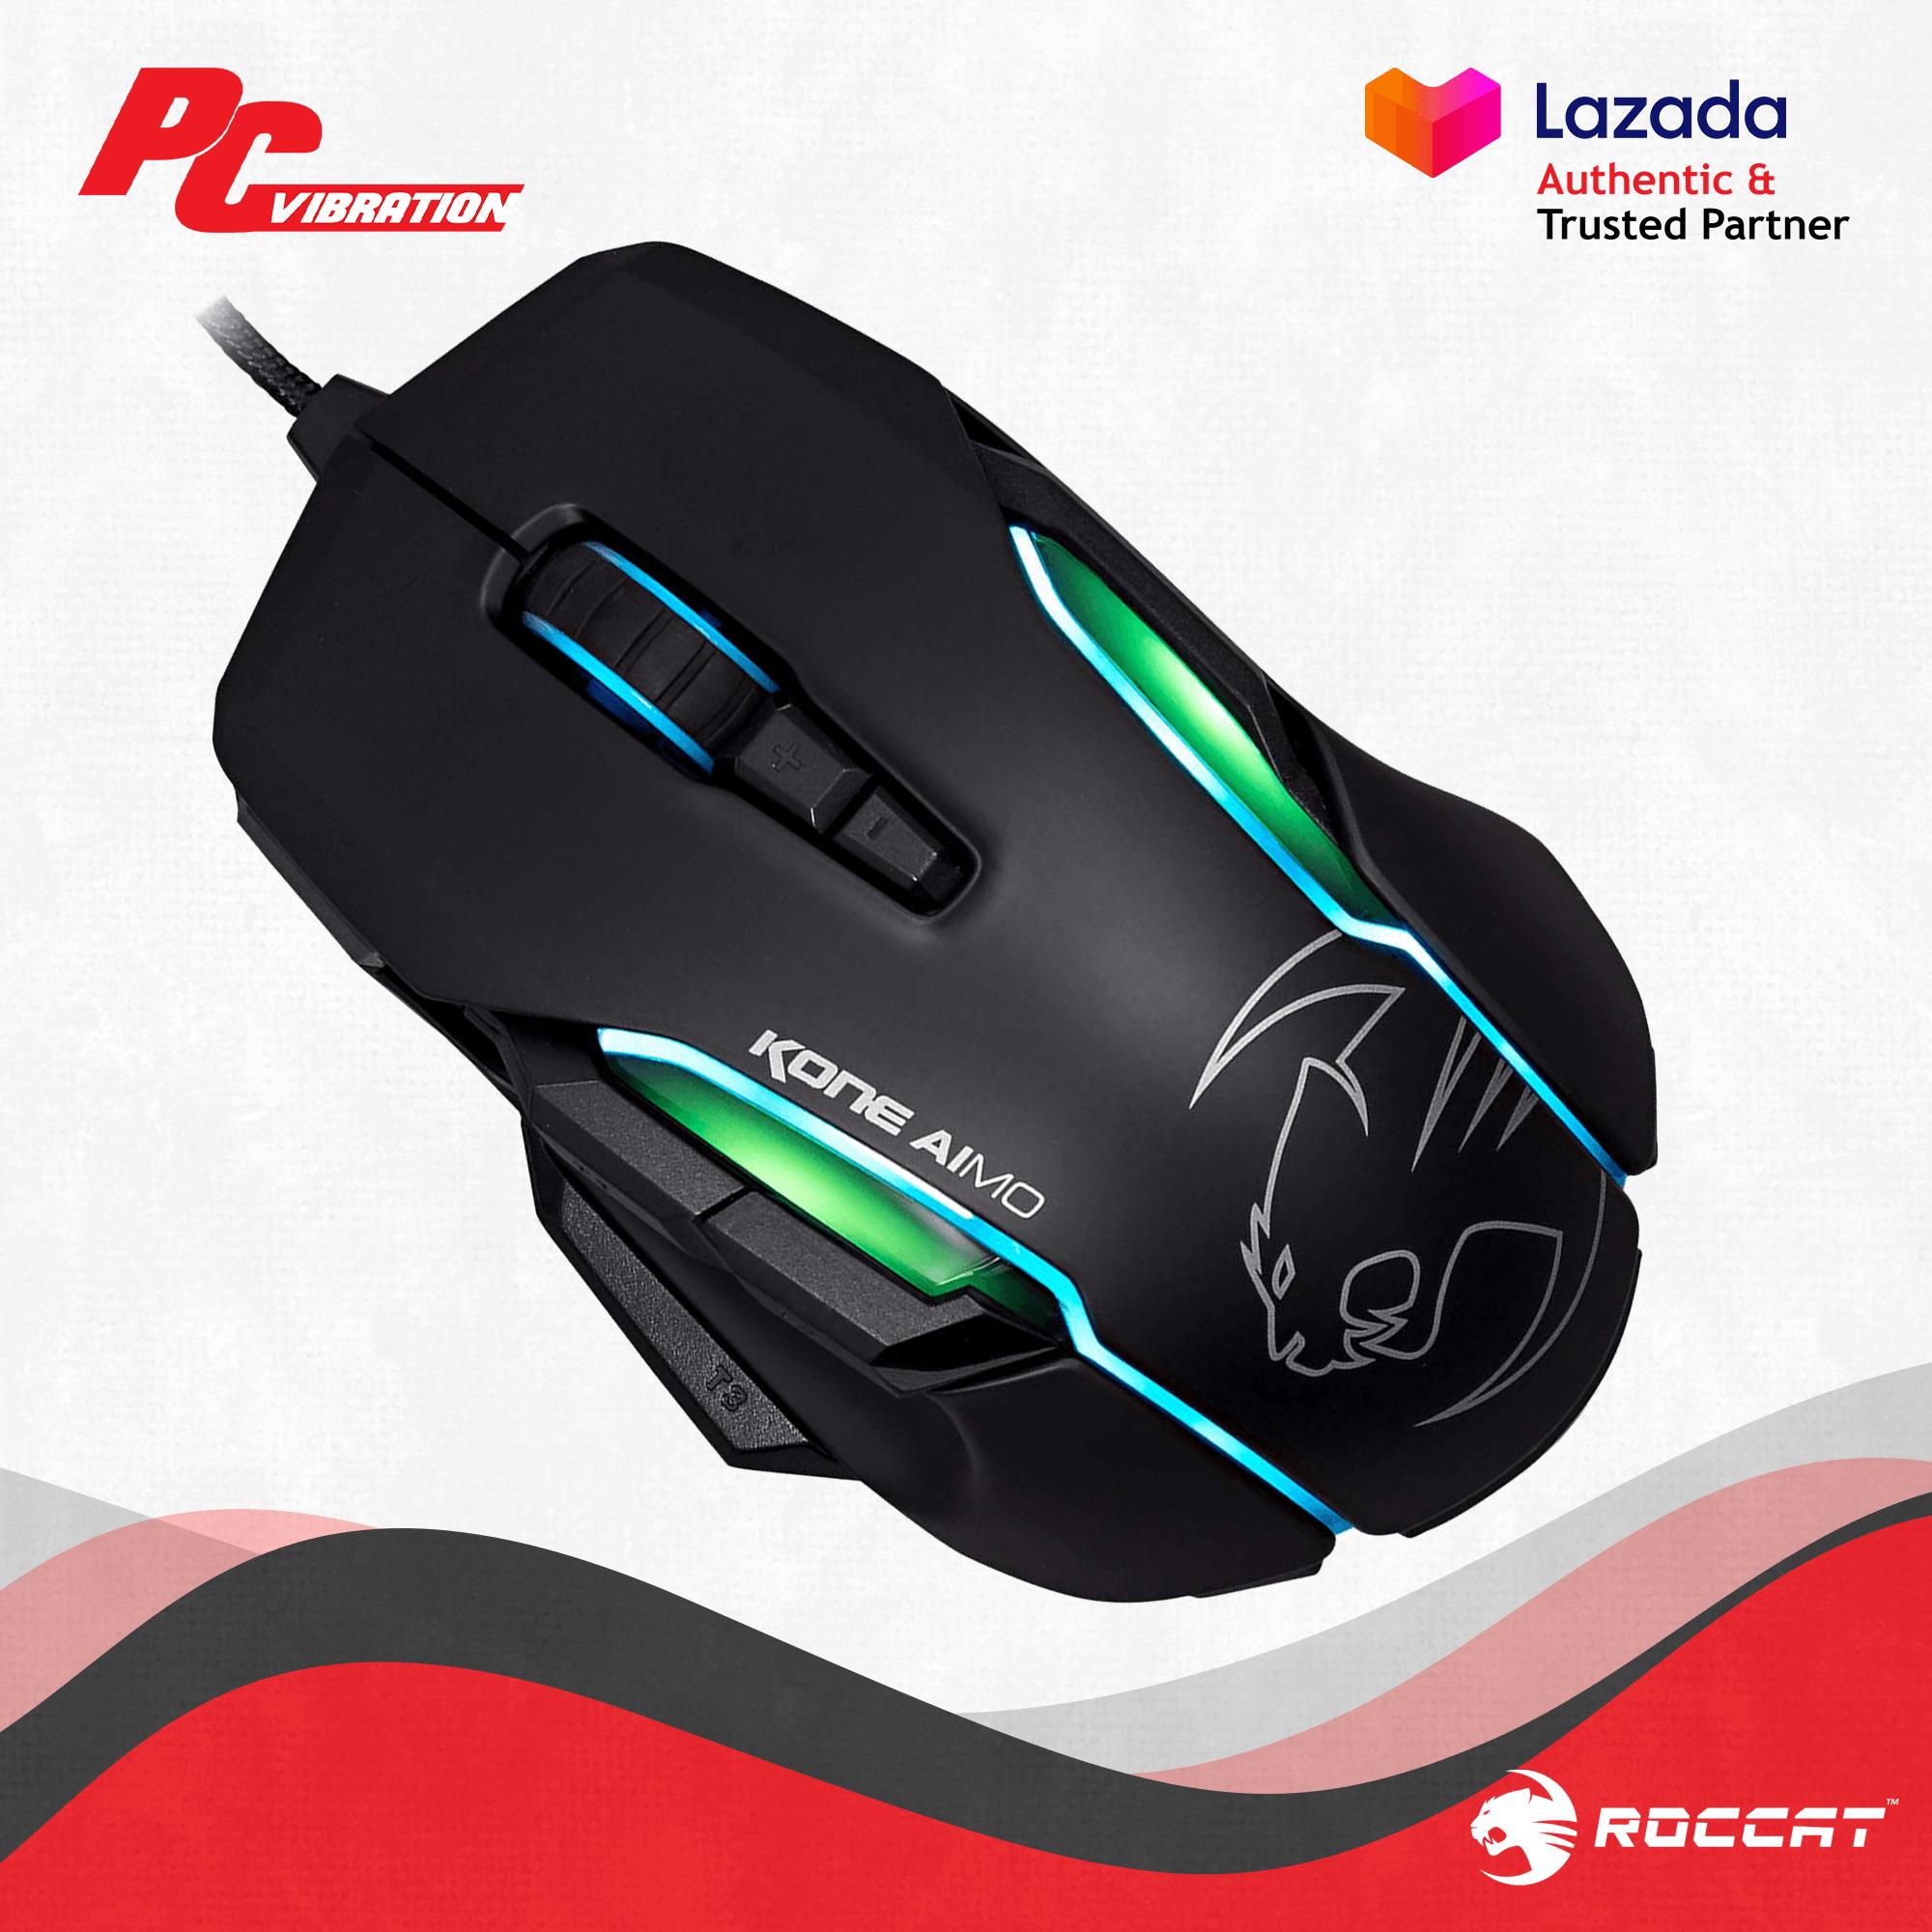 Roccat Kain Aimo Shop Roccat Kain Aimo With Great Discounts And Prices Online Lazada Philippines